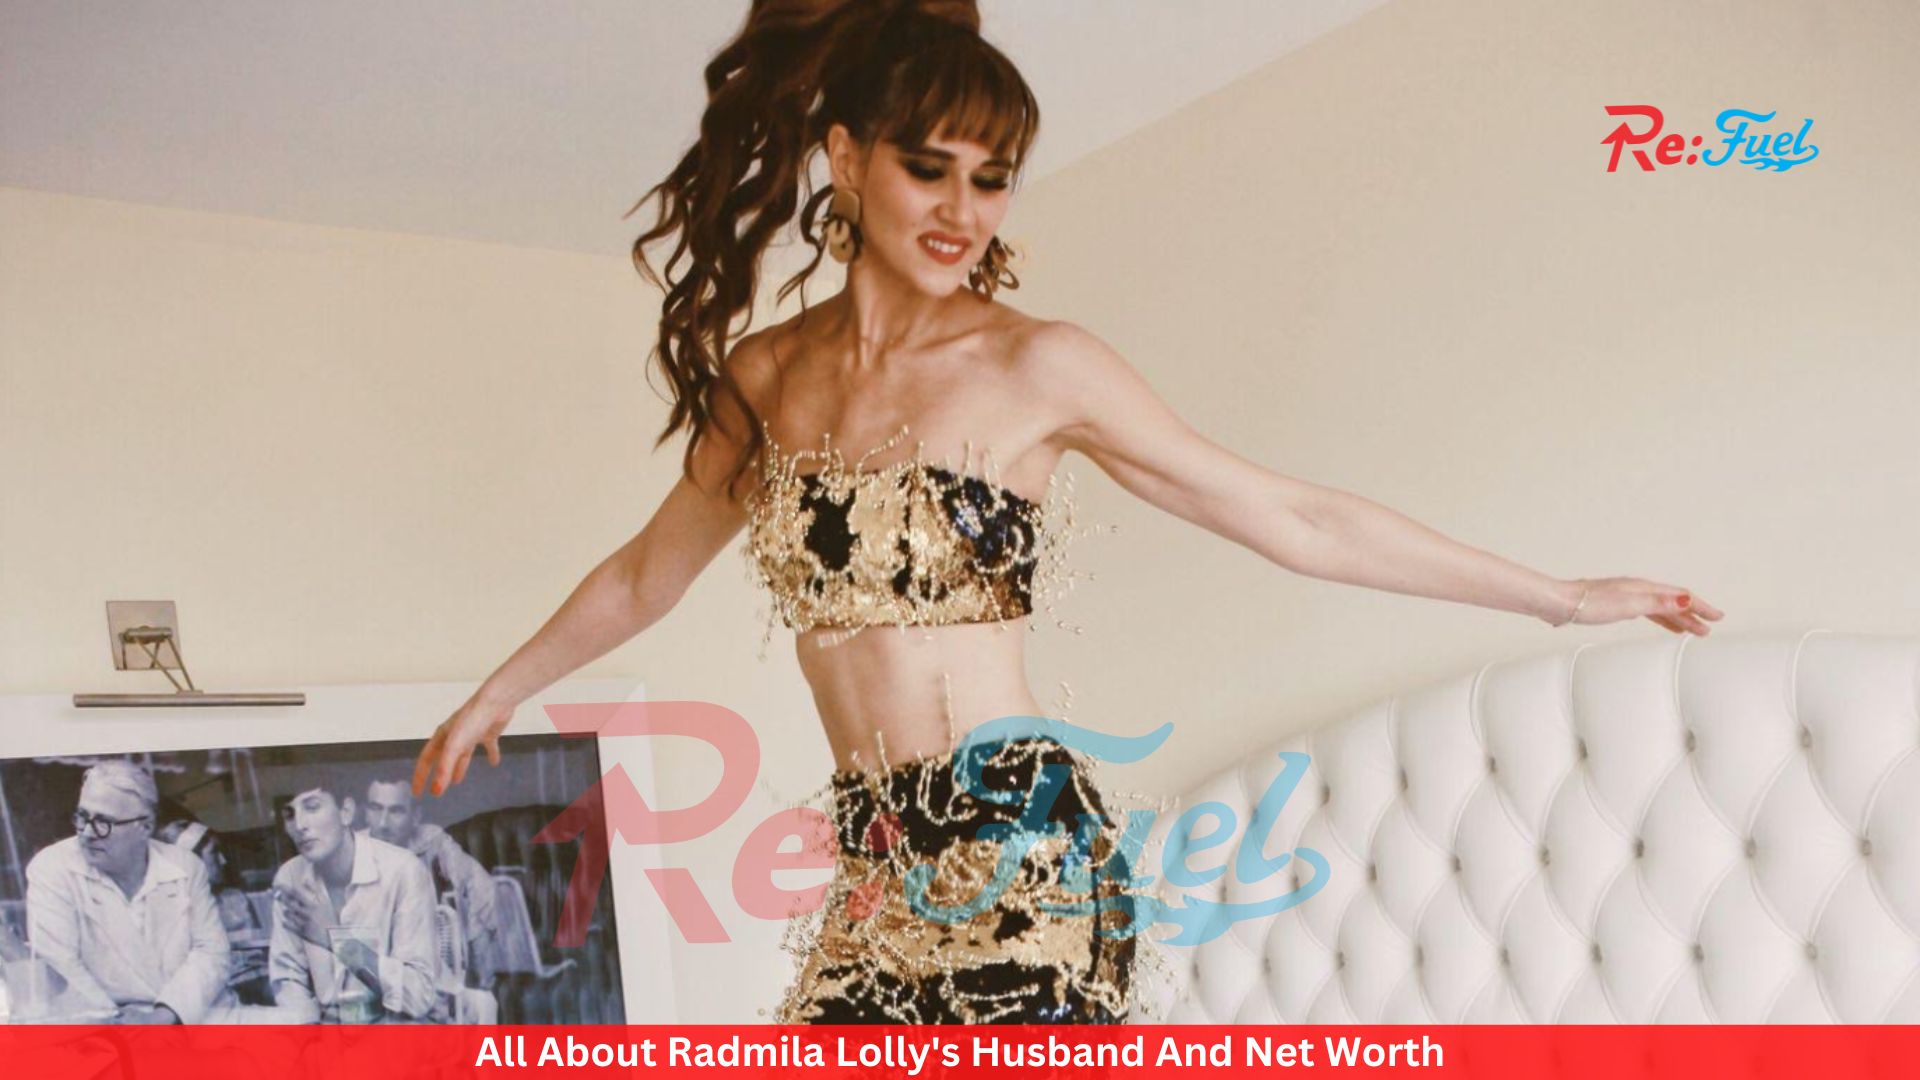 All About Radmila Lolly's Husband And Net Worth